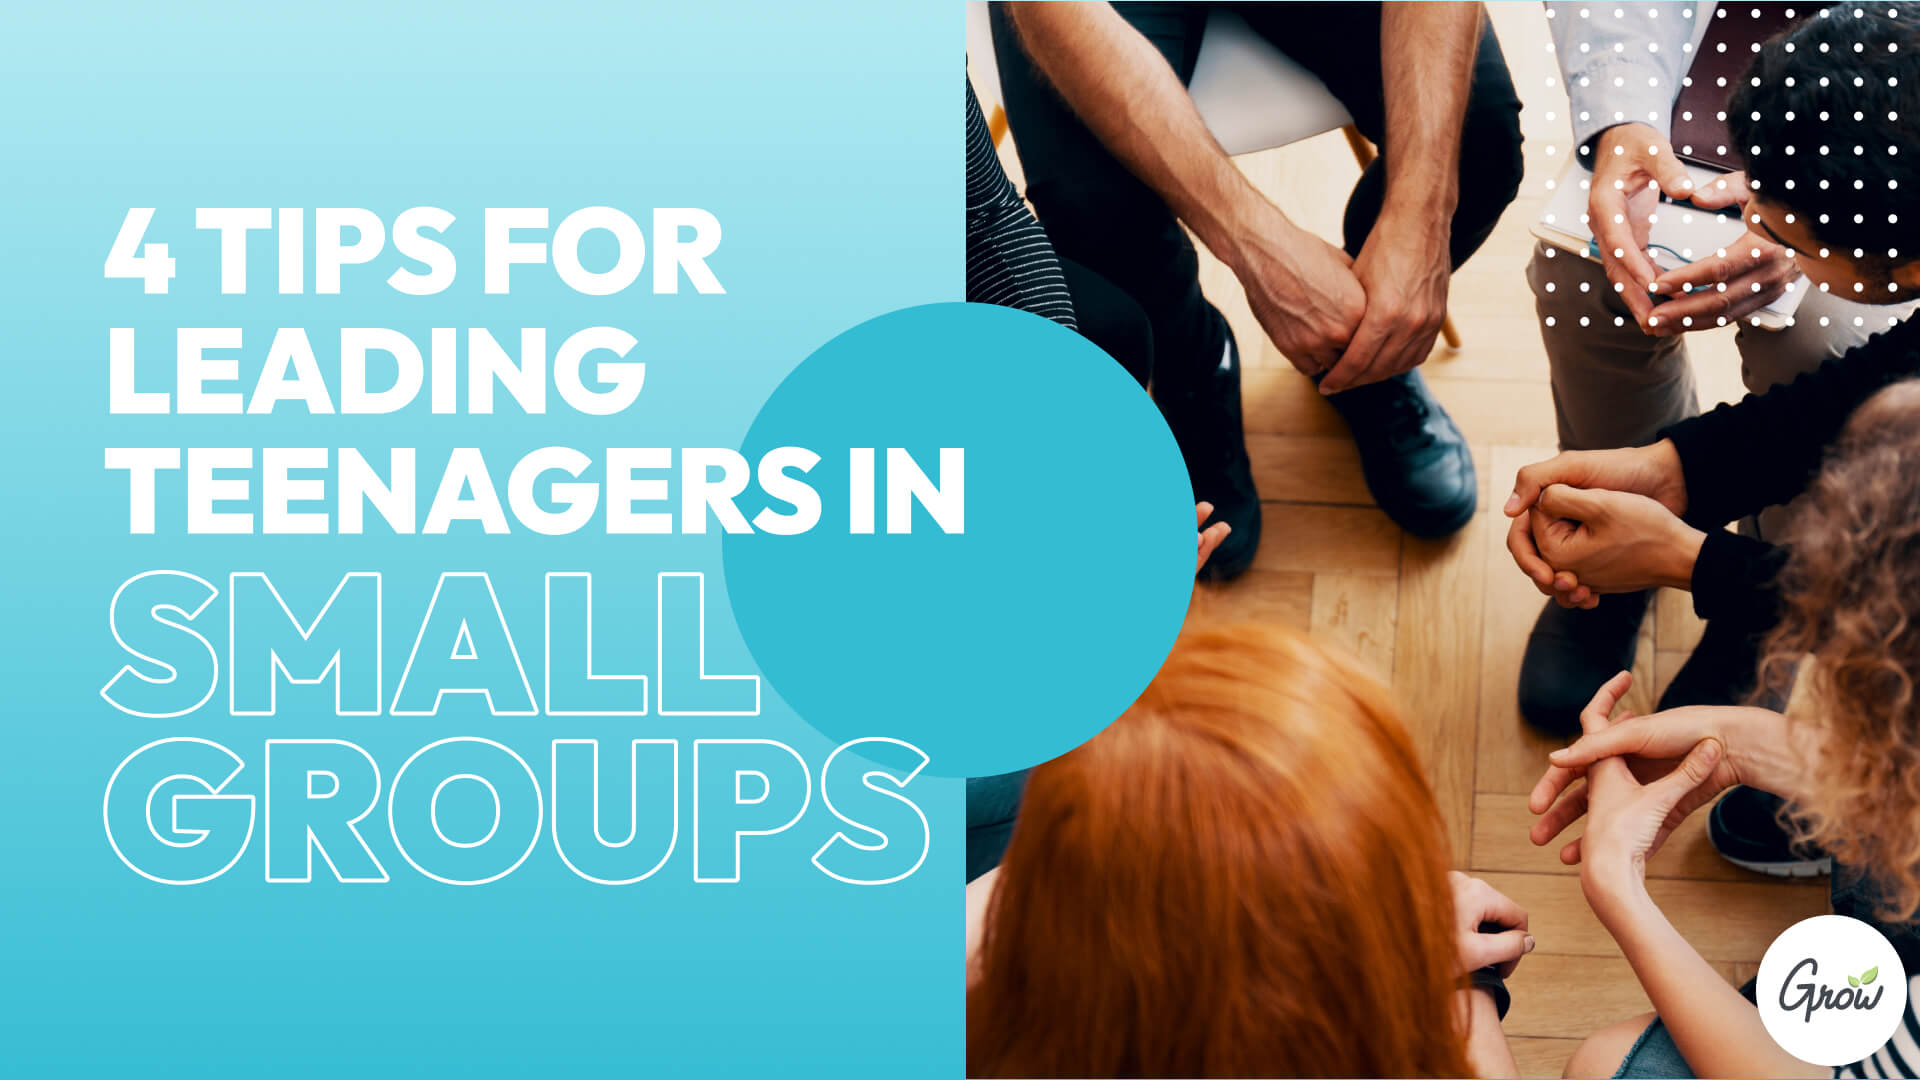 4 Tips for Leading Teenagers in Small Groups